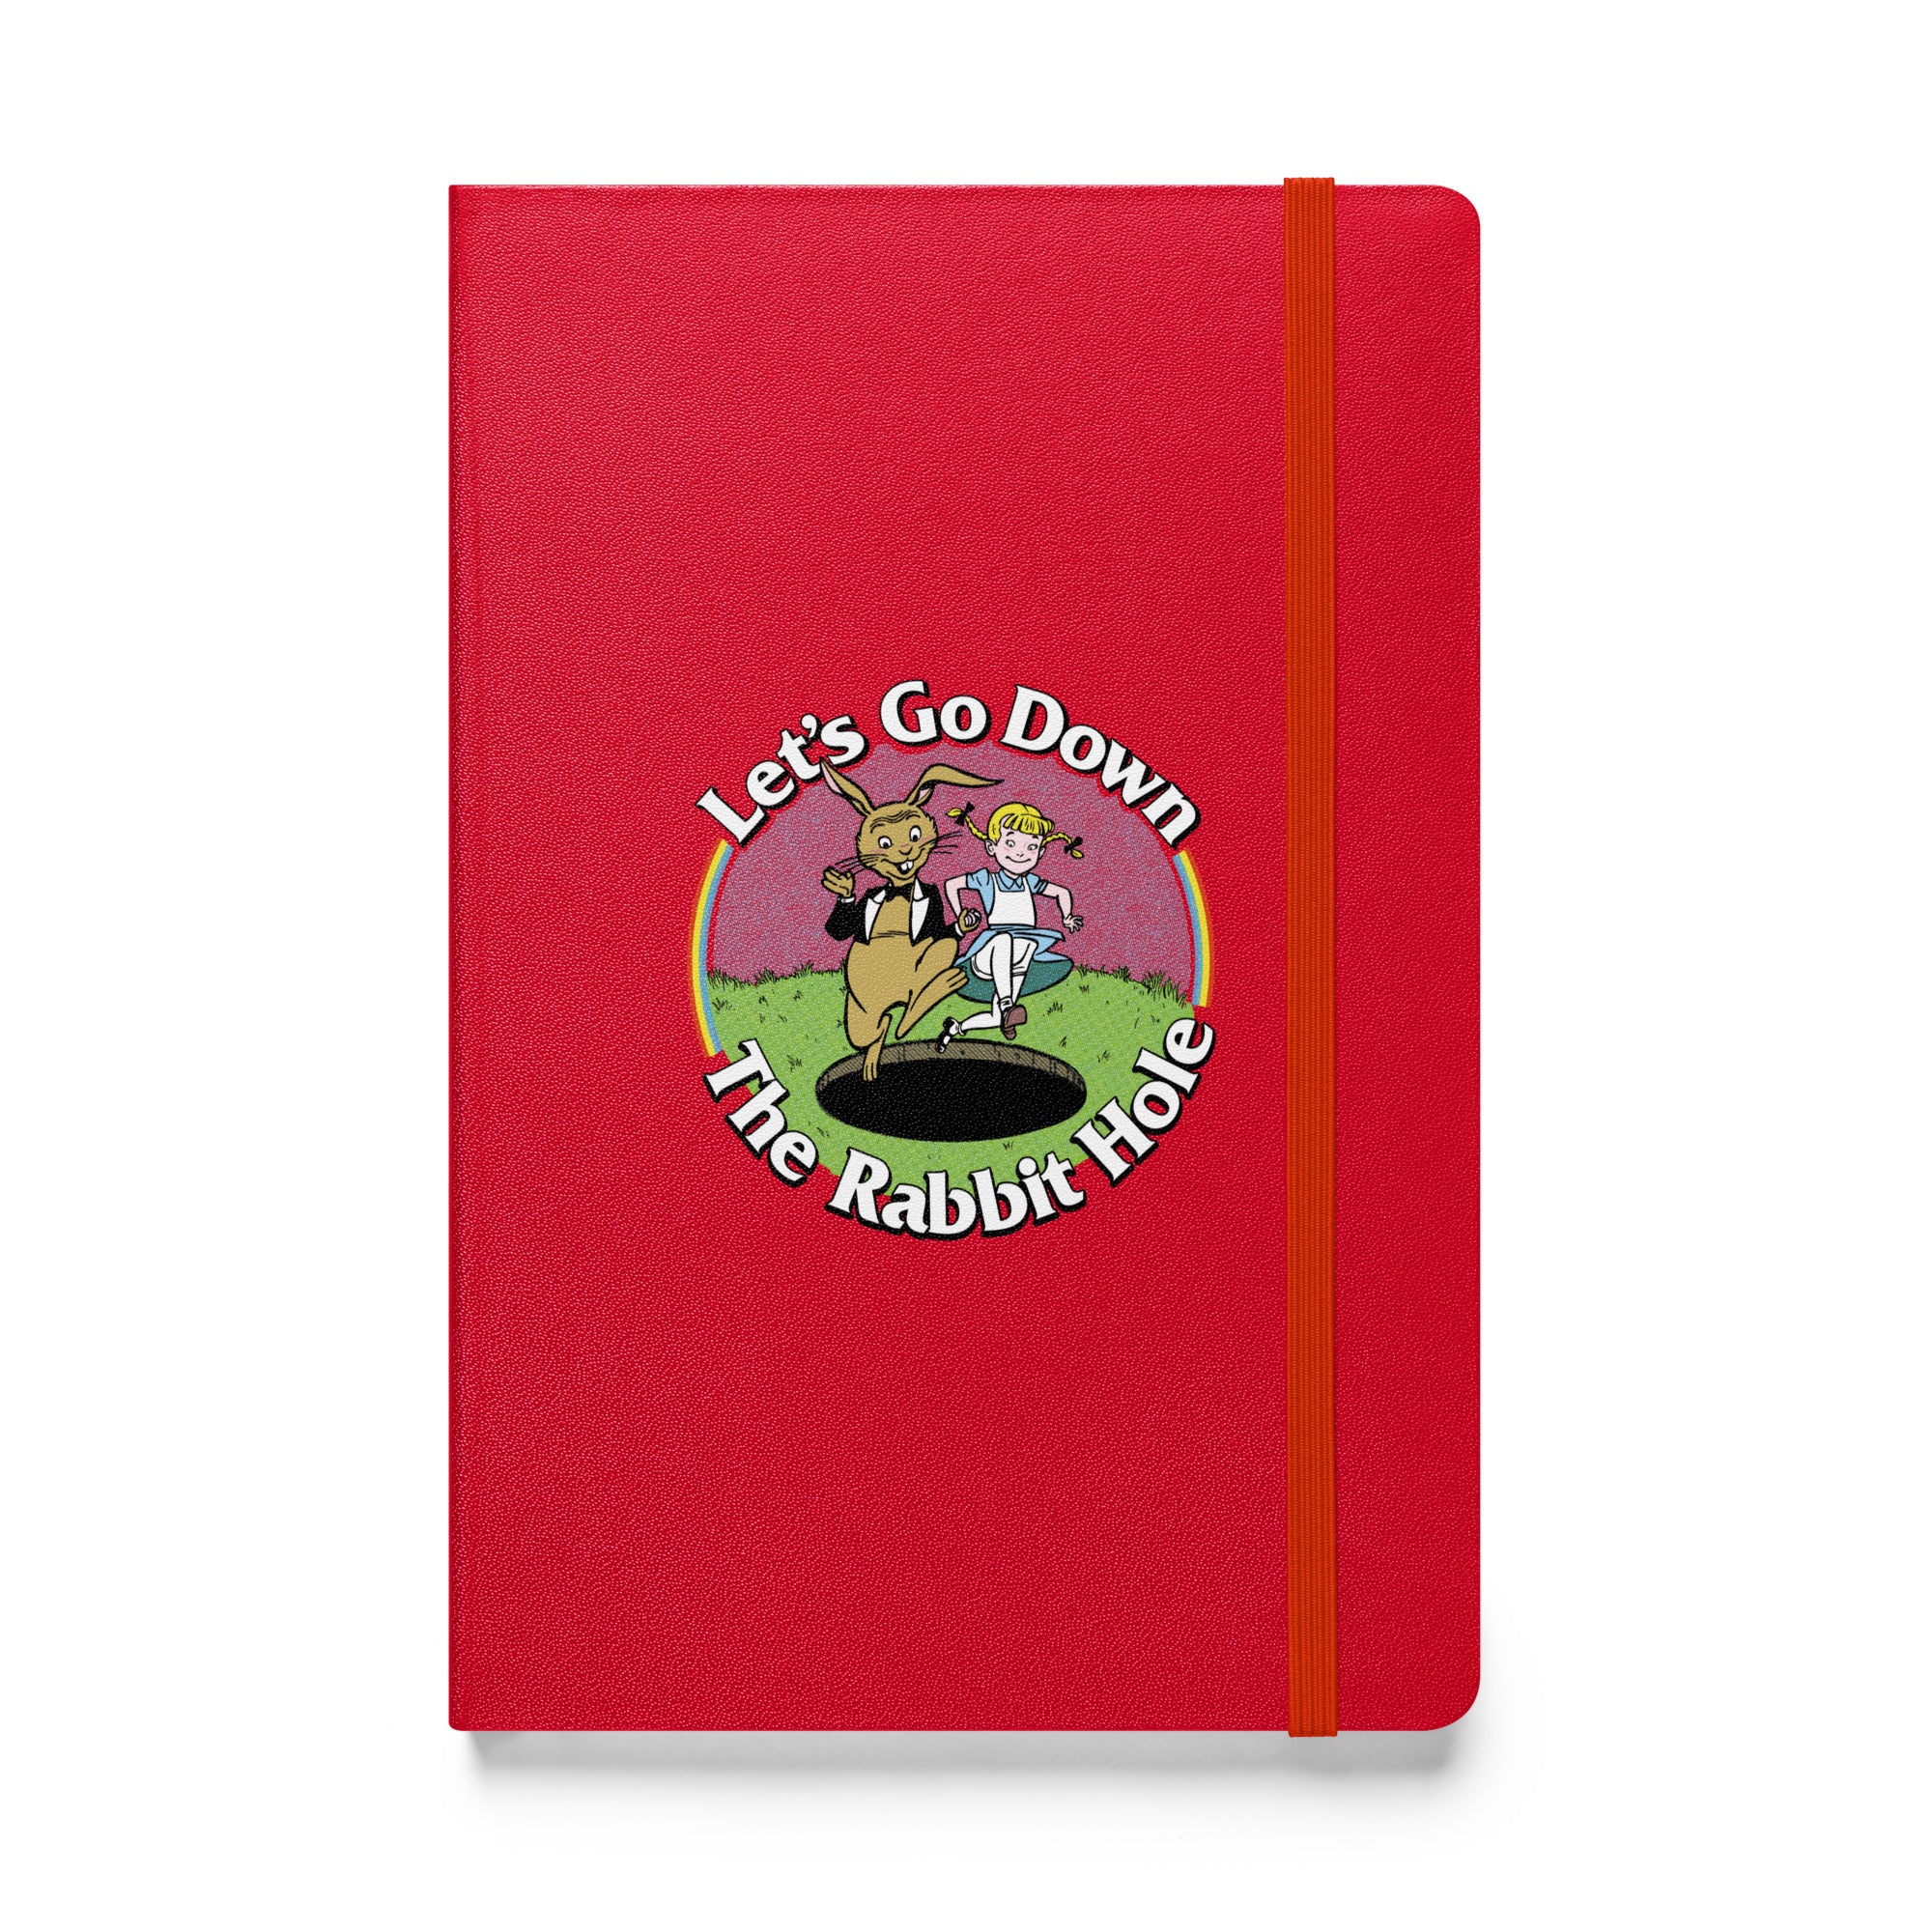 Let's Go Down the Rabbit Hole Hardcover Bound Notebook